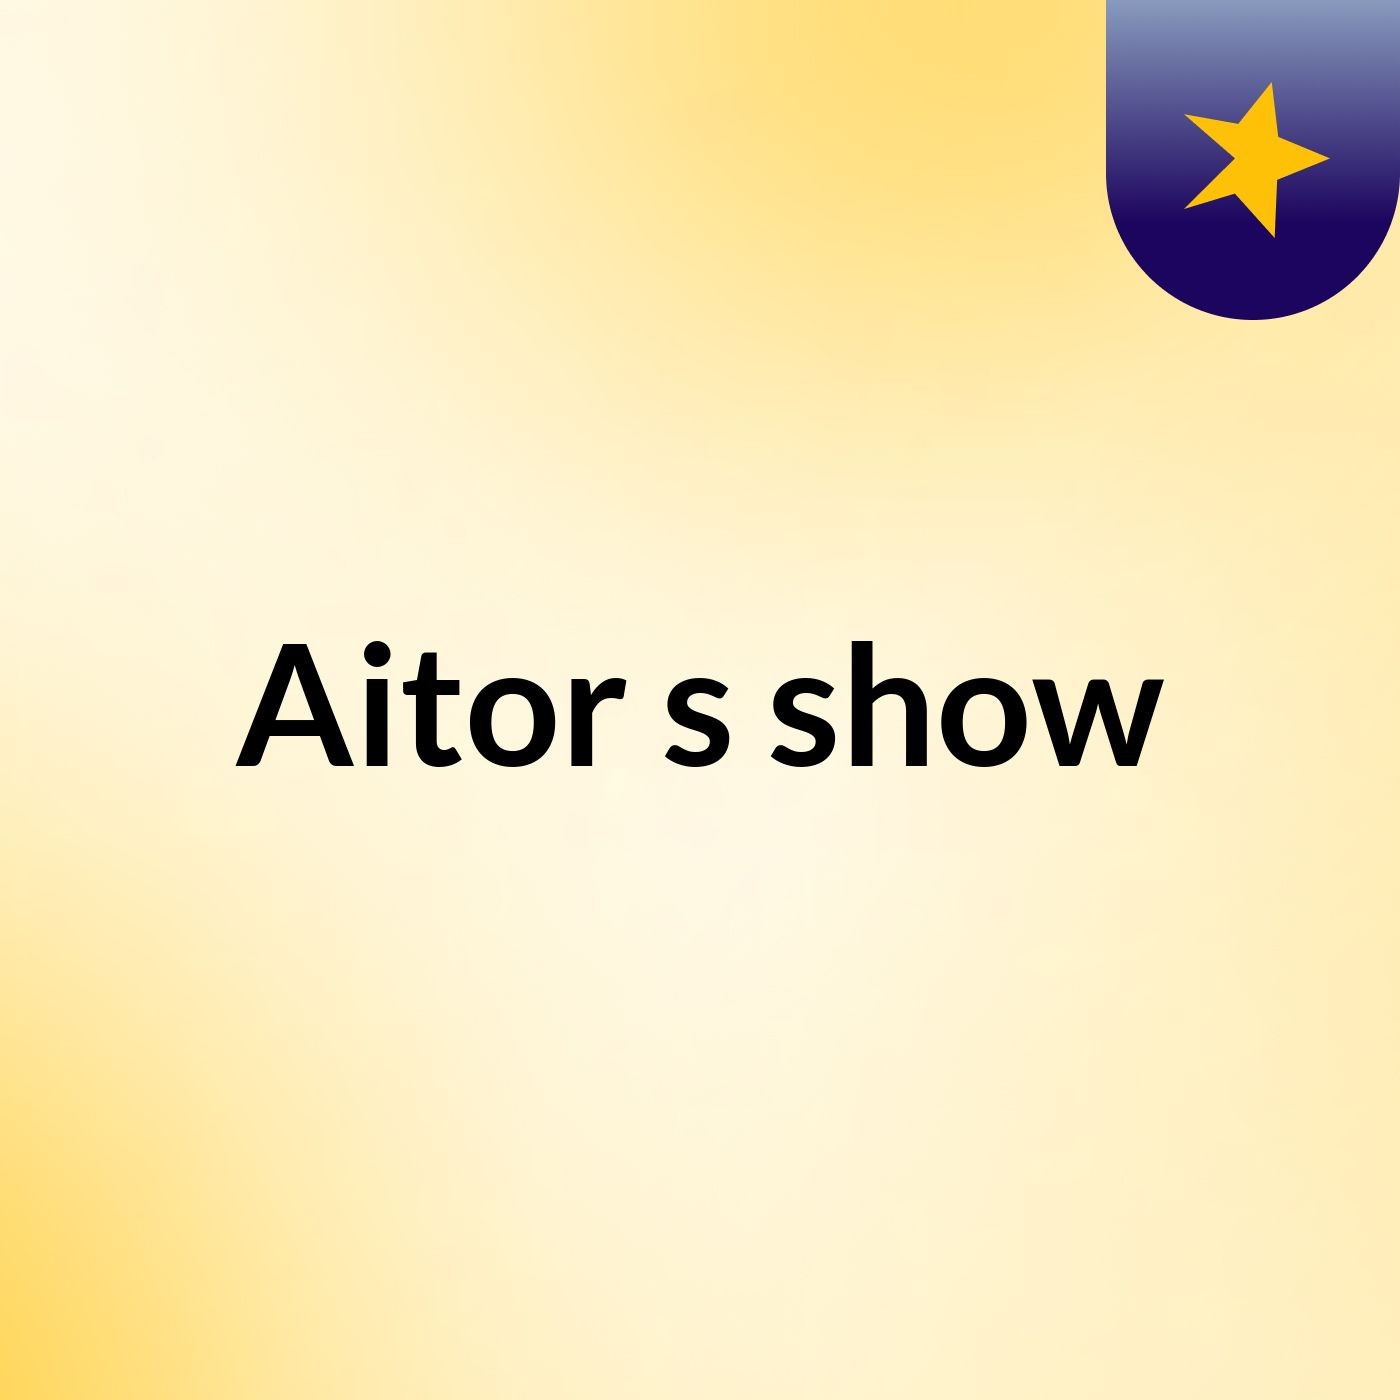 Aitor's show